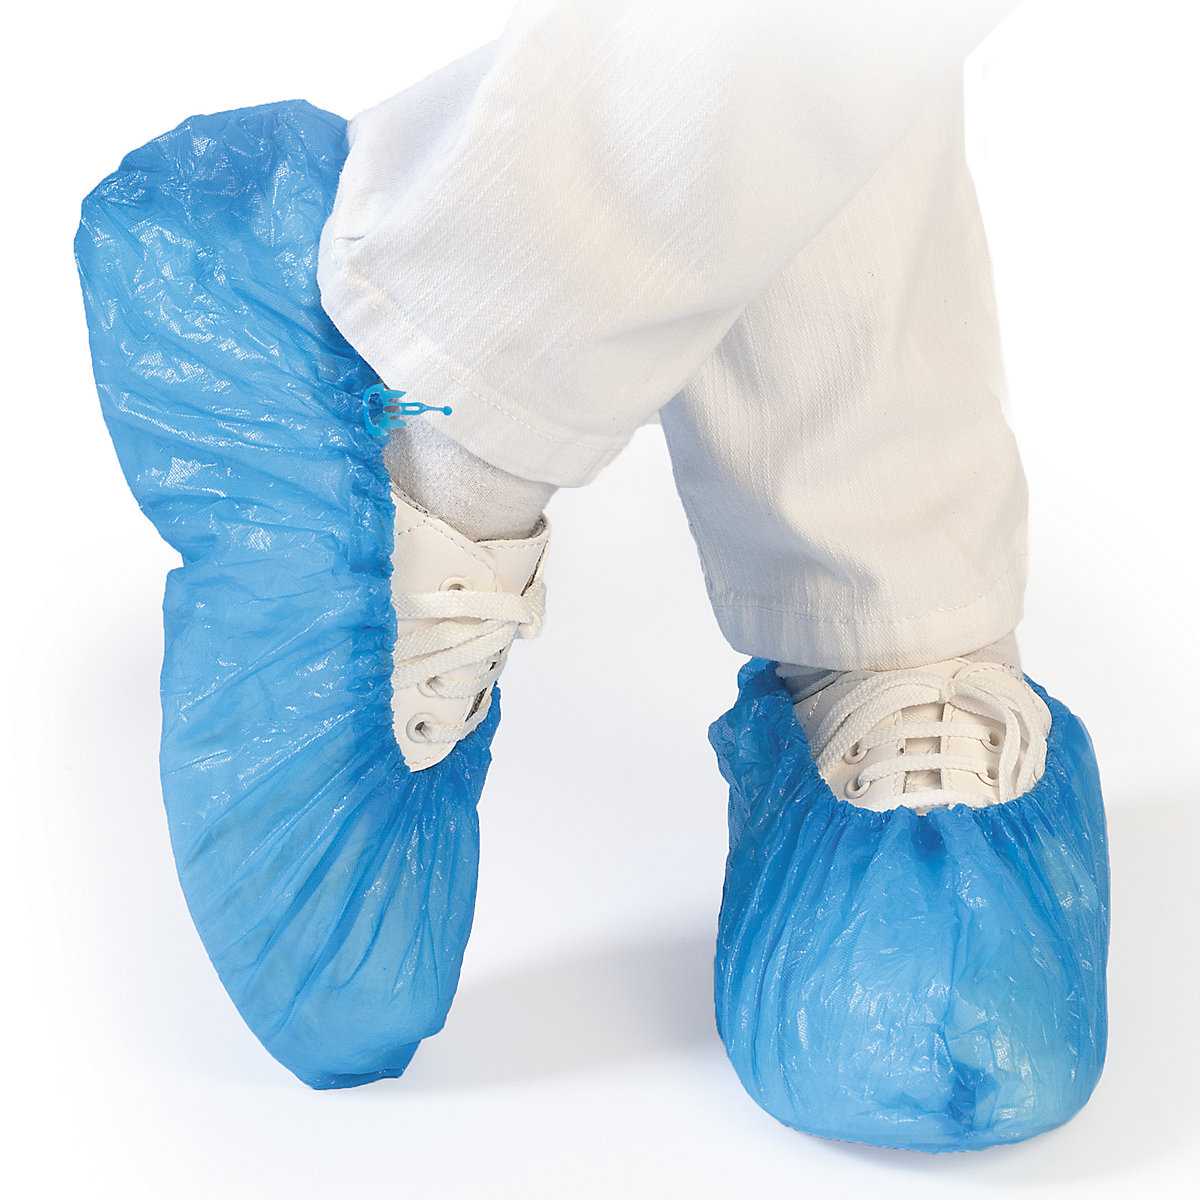 Disposable overshoes made of CPE